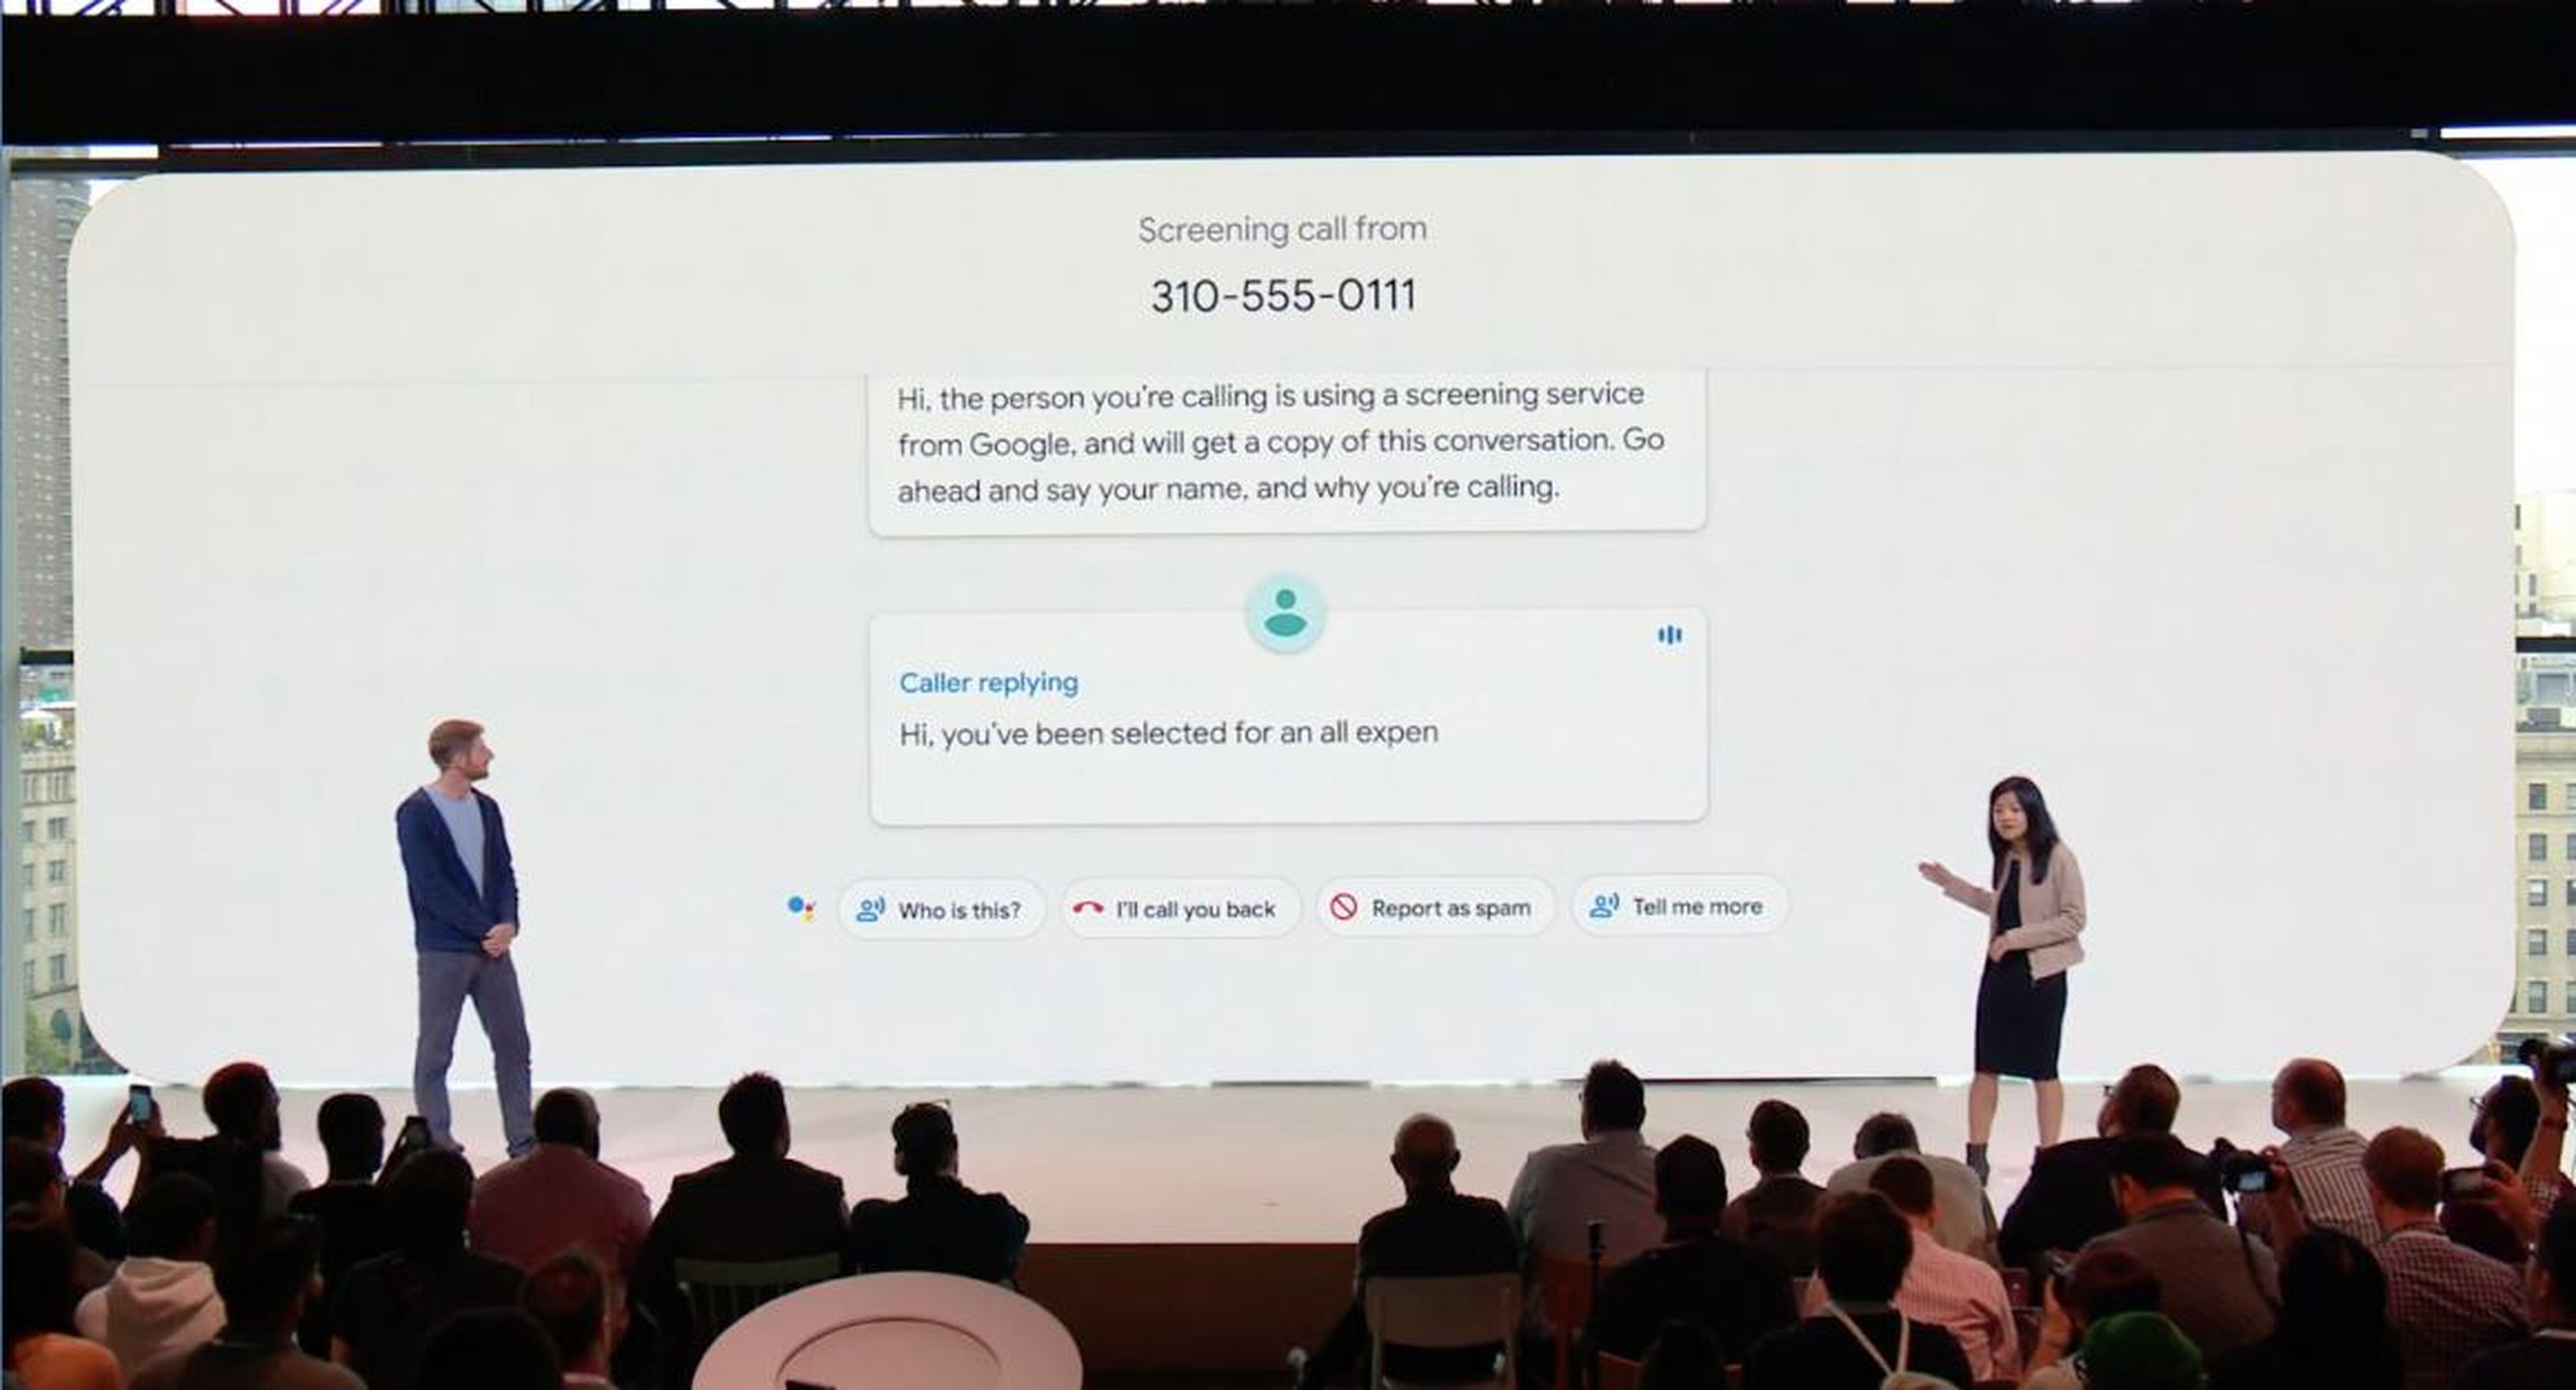 Google's new phone software aims to end telemarketer calls for good